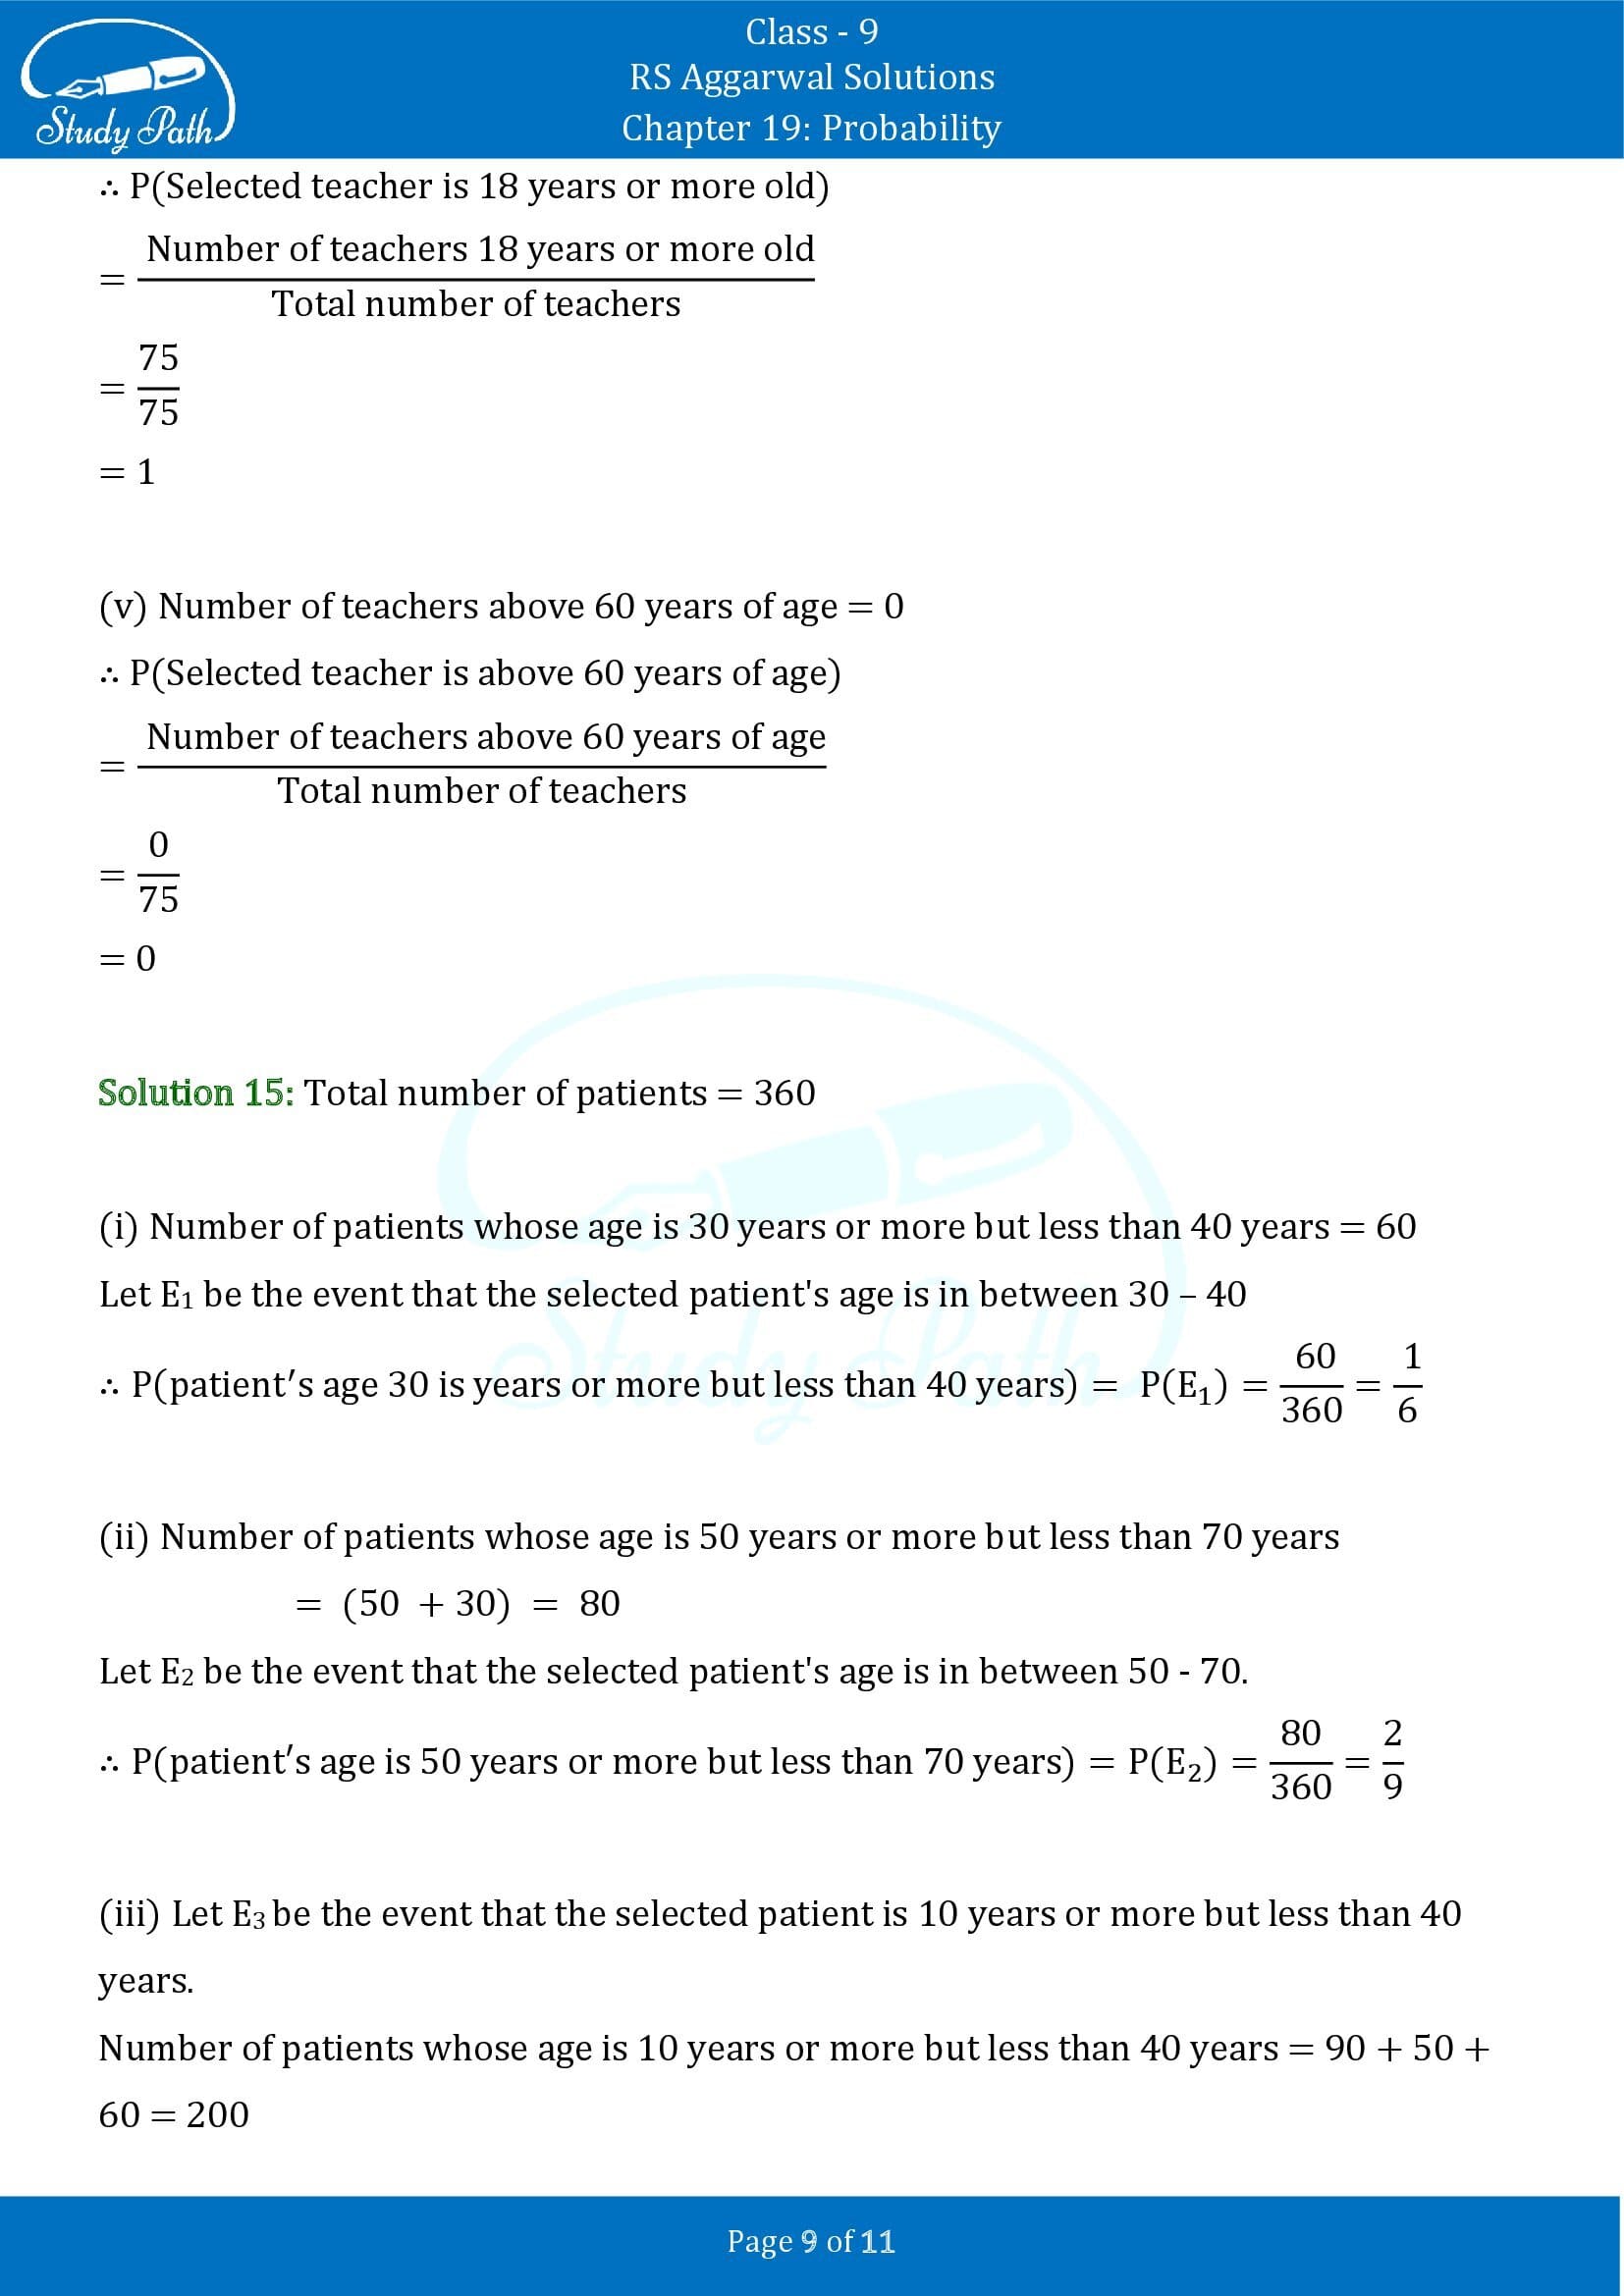 RS Aggarwal Solutions Class 9 Chapter 19 Probability Exercise 19 00009